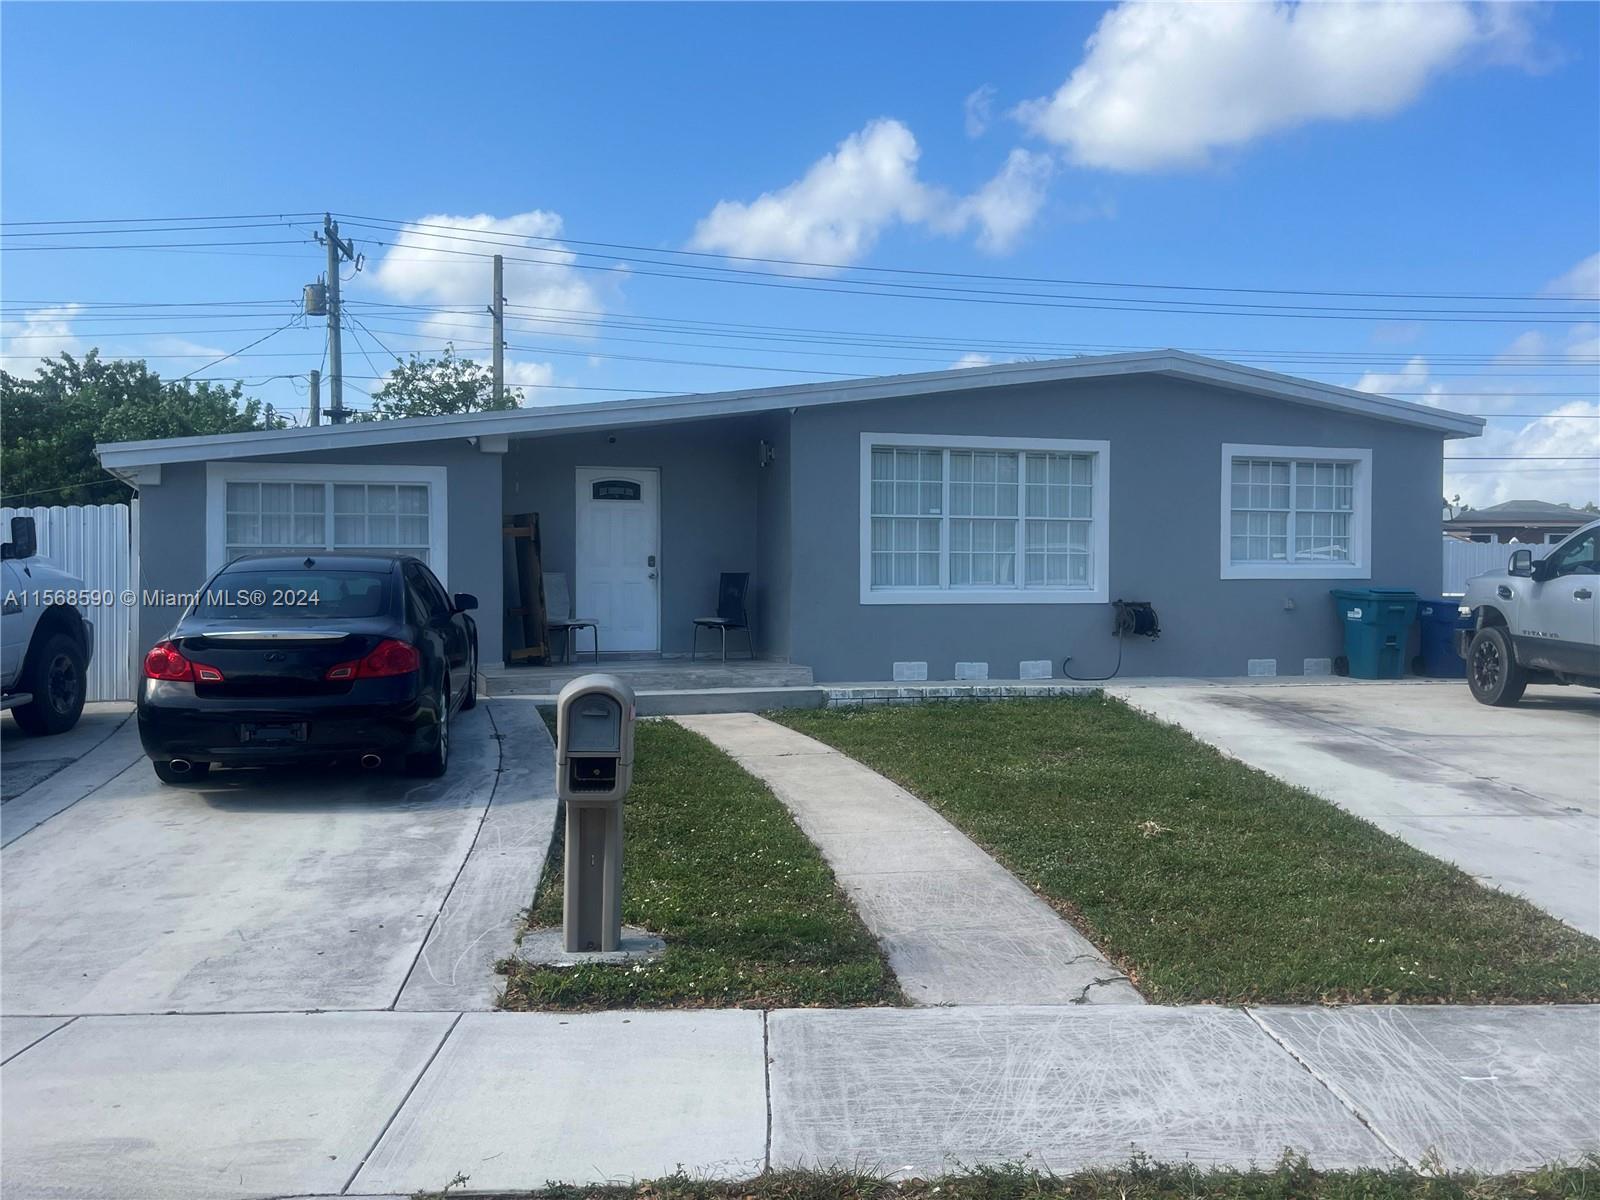 Photo of 3461 NW 178th St in Miami Gardens, FL